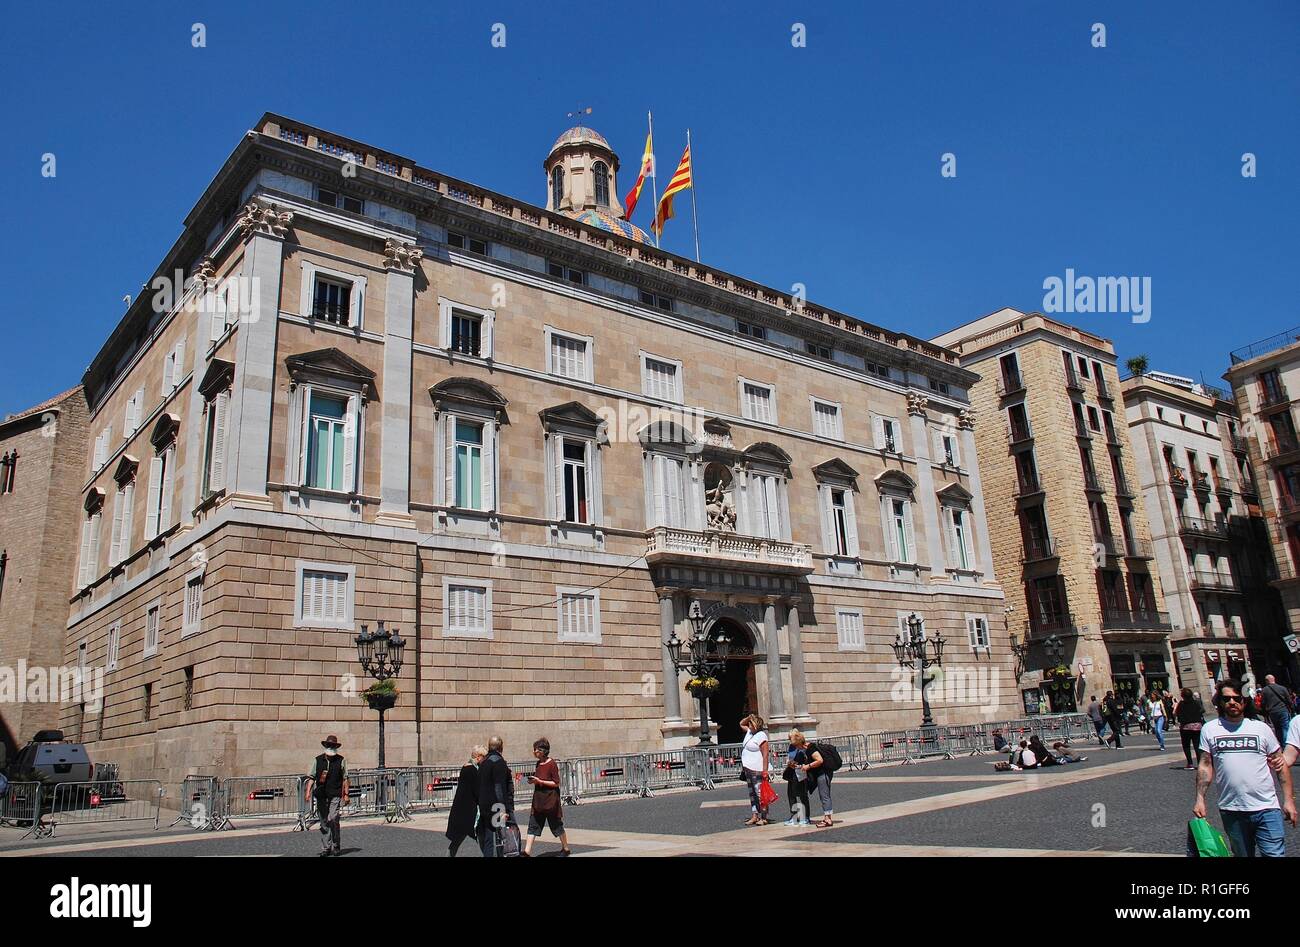 The Palau de la Generalitat de Catalunya at Placa Sant Jaume in Barcelona, Spain on April 17, 2018. The building is home to the Catalan Government. Stock Photo